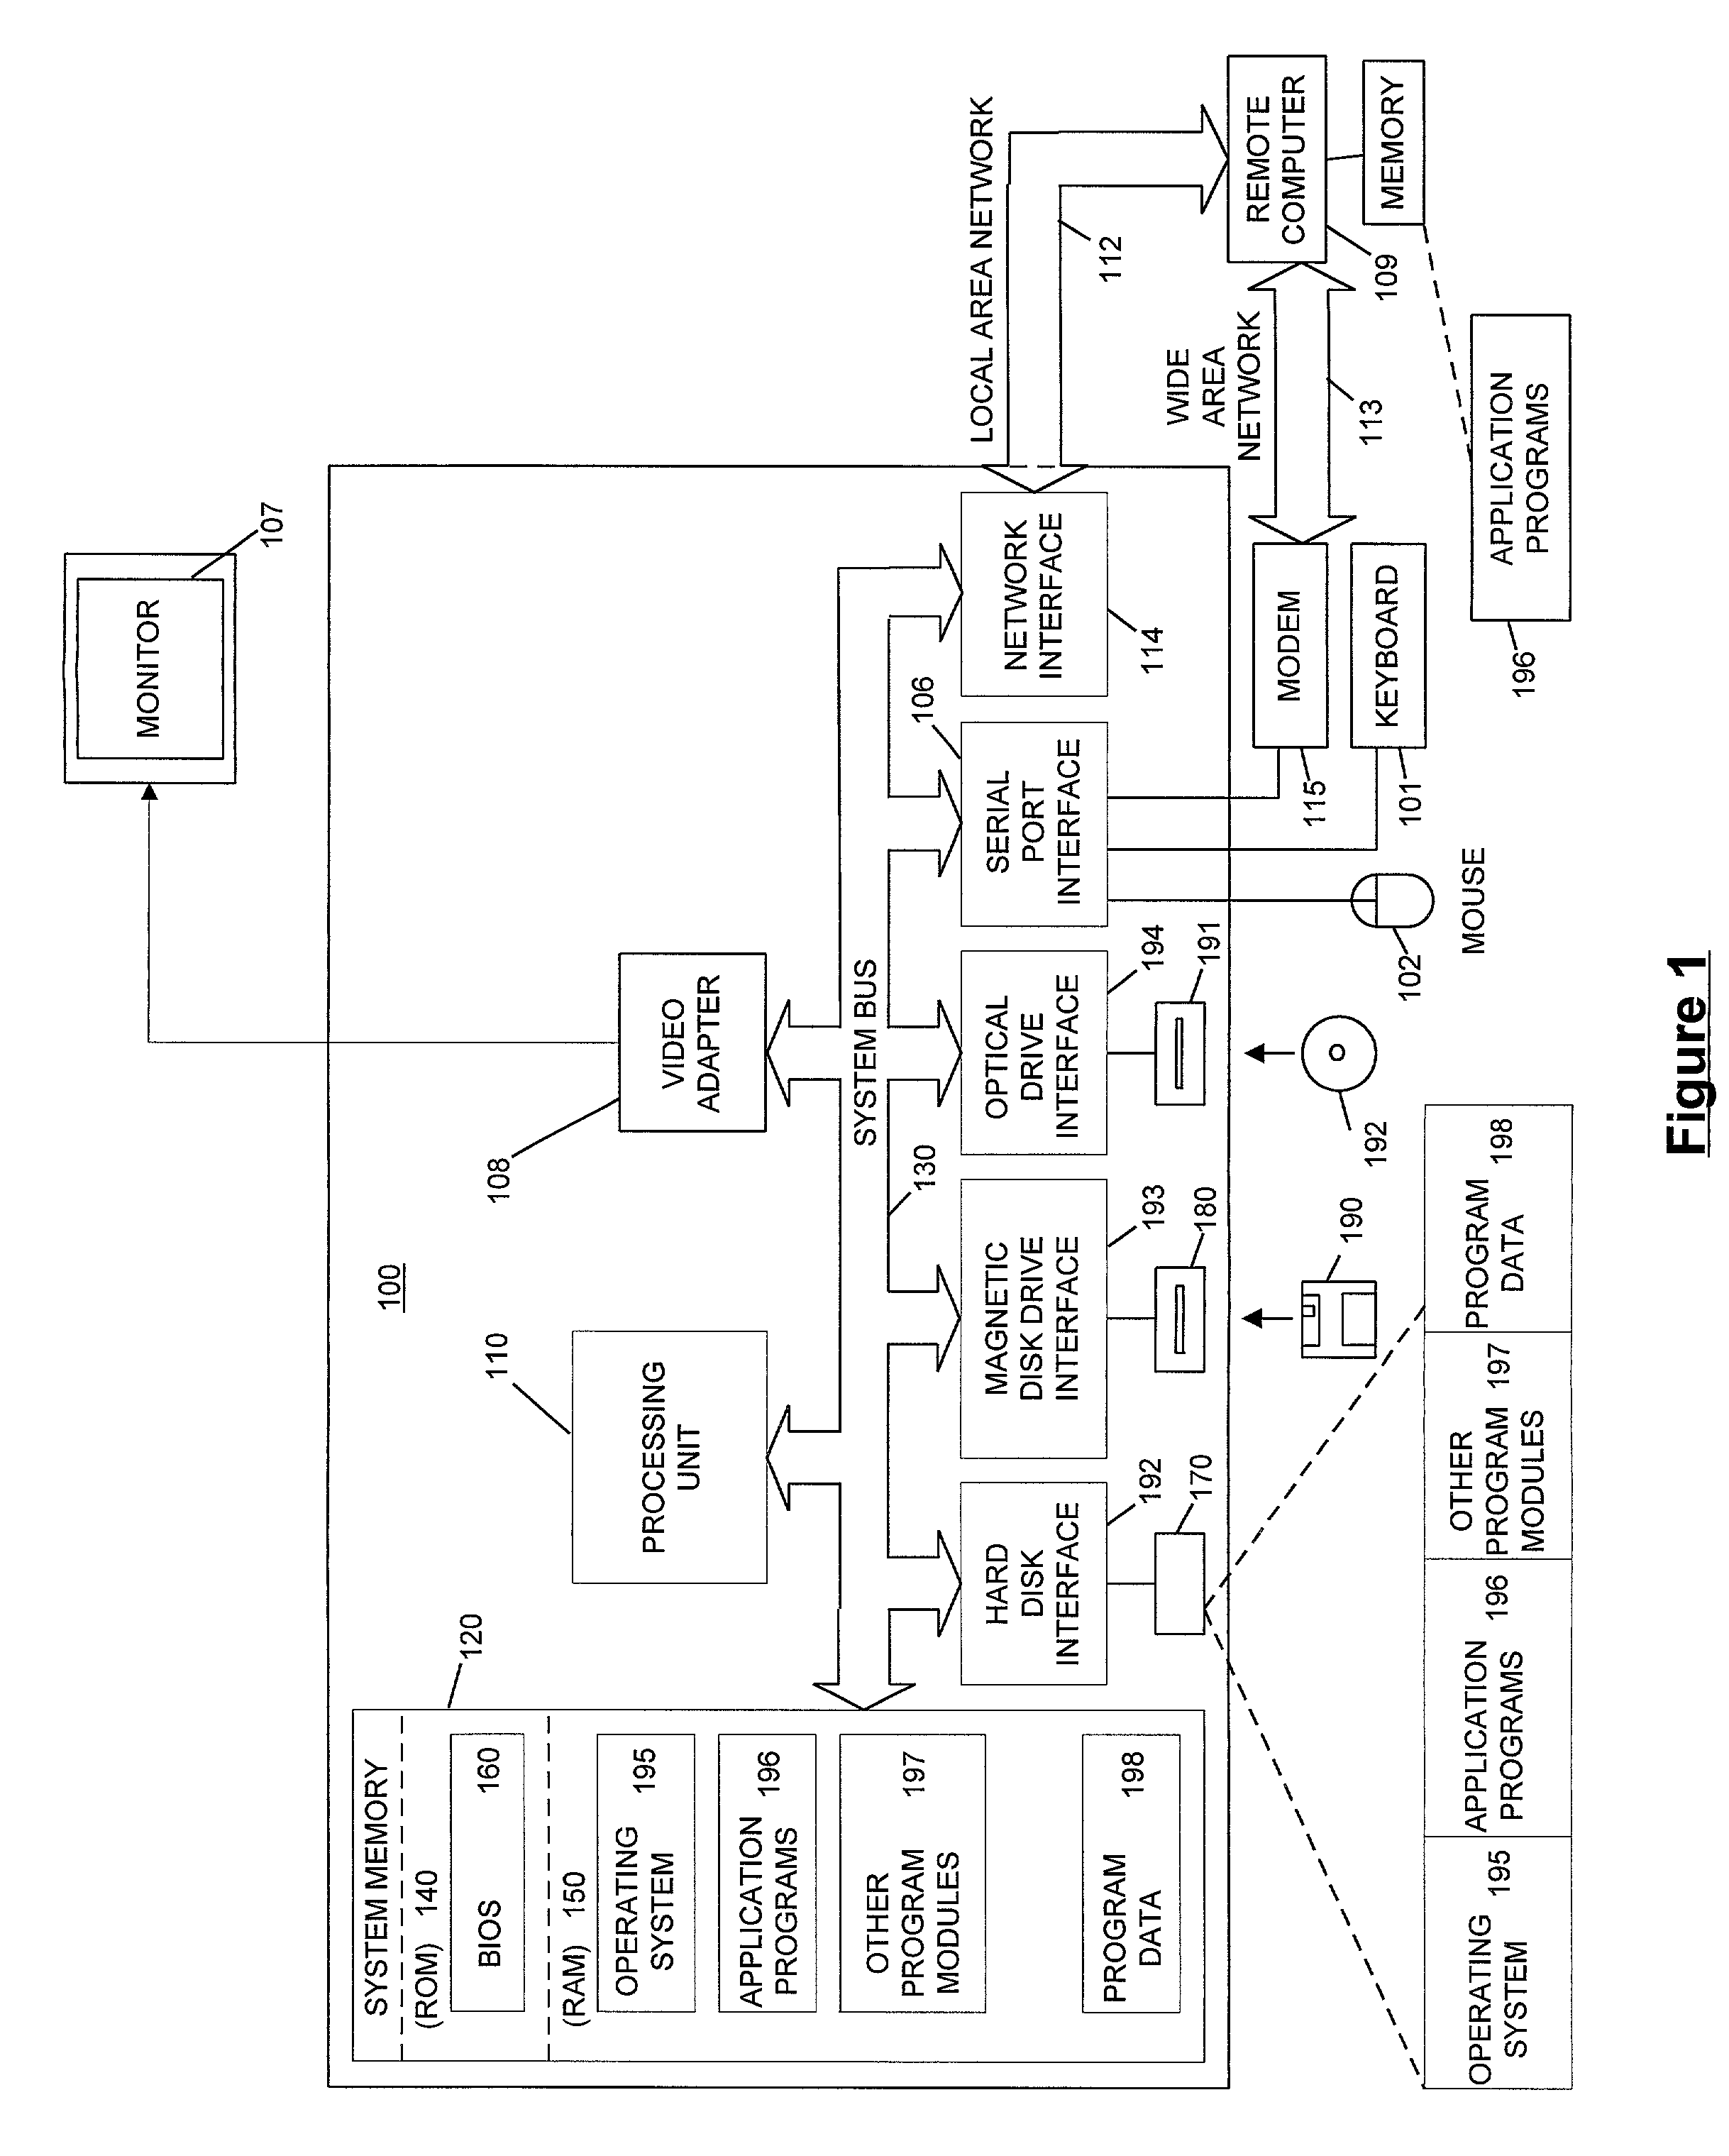 Method and apparatus for fostering immersive reading of electronic documents